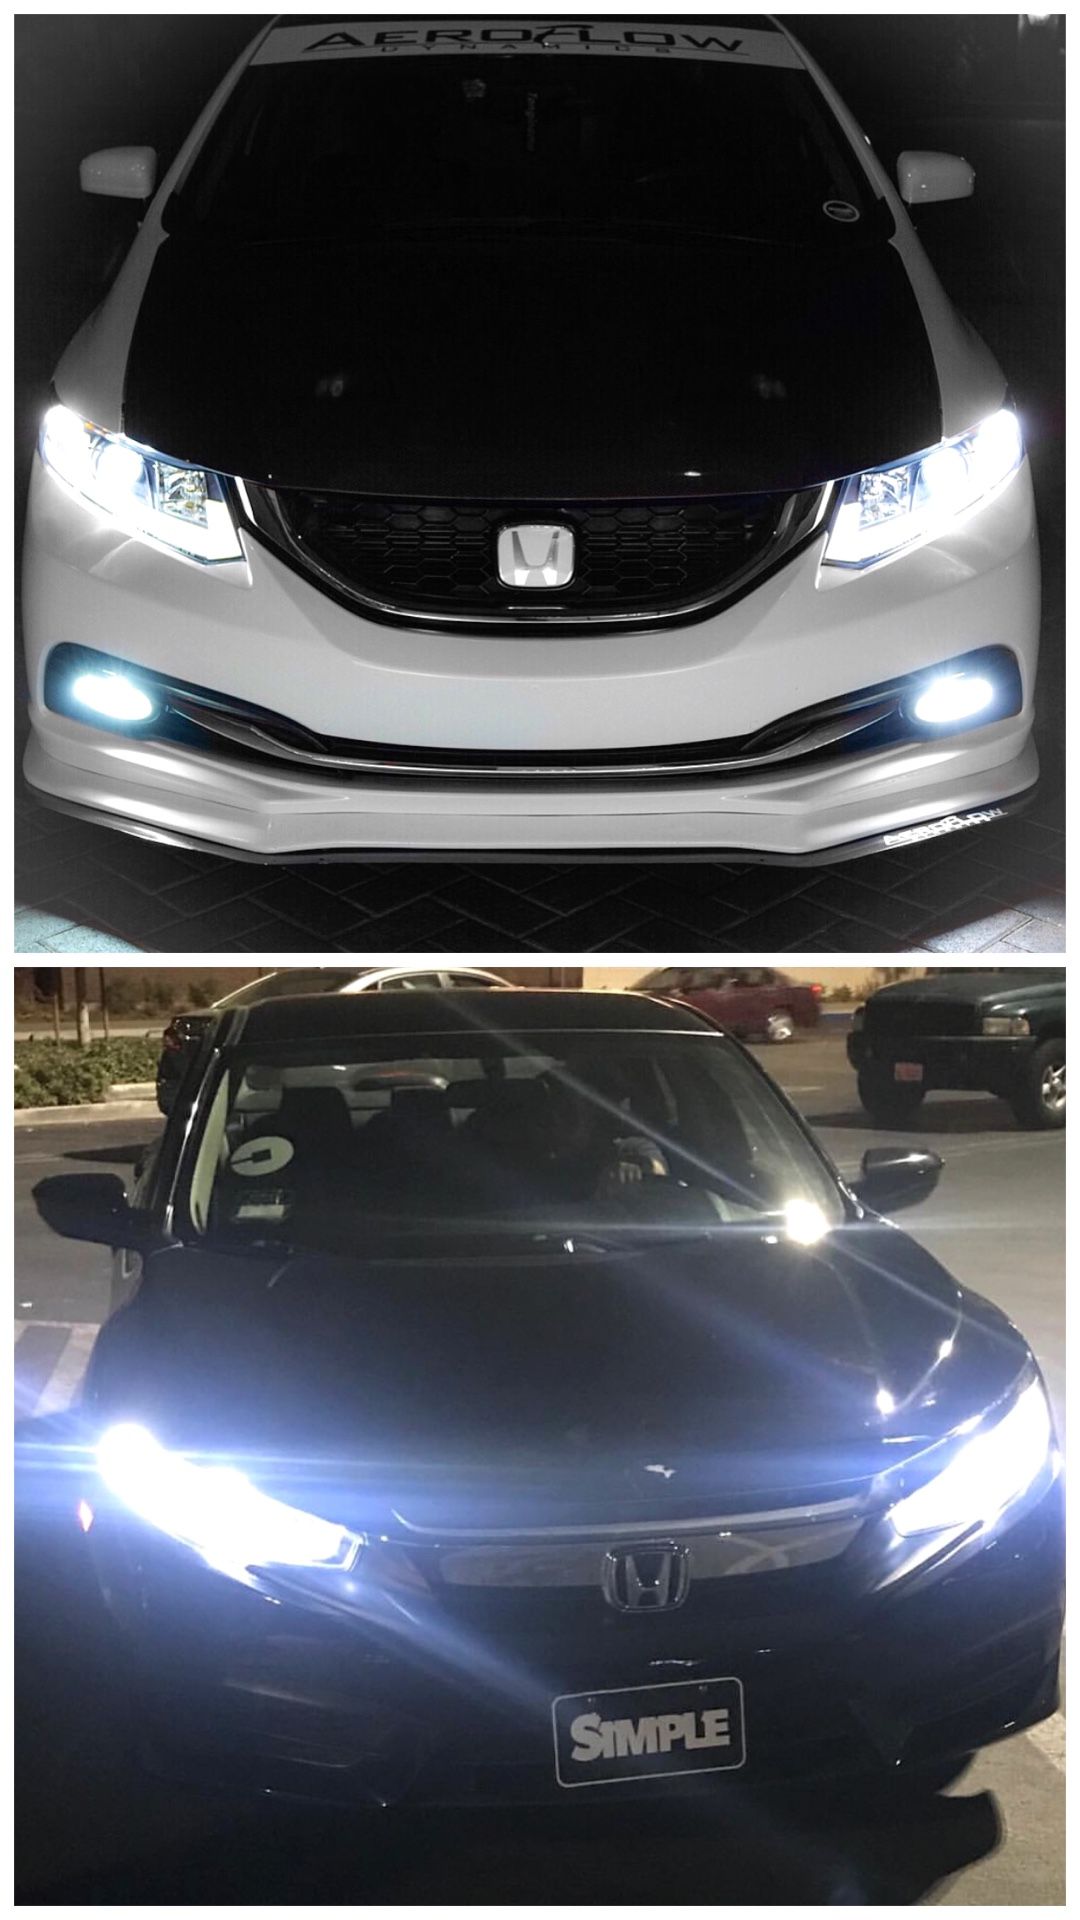 Ready for pick up led headlights or fog lights for ALL cars $25 & FREE license plate led